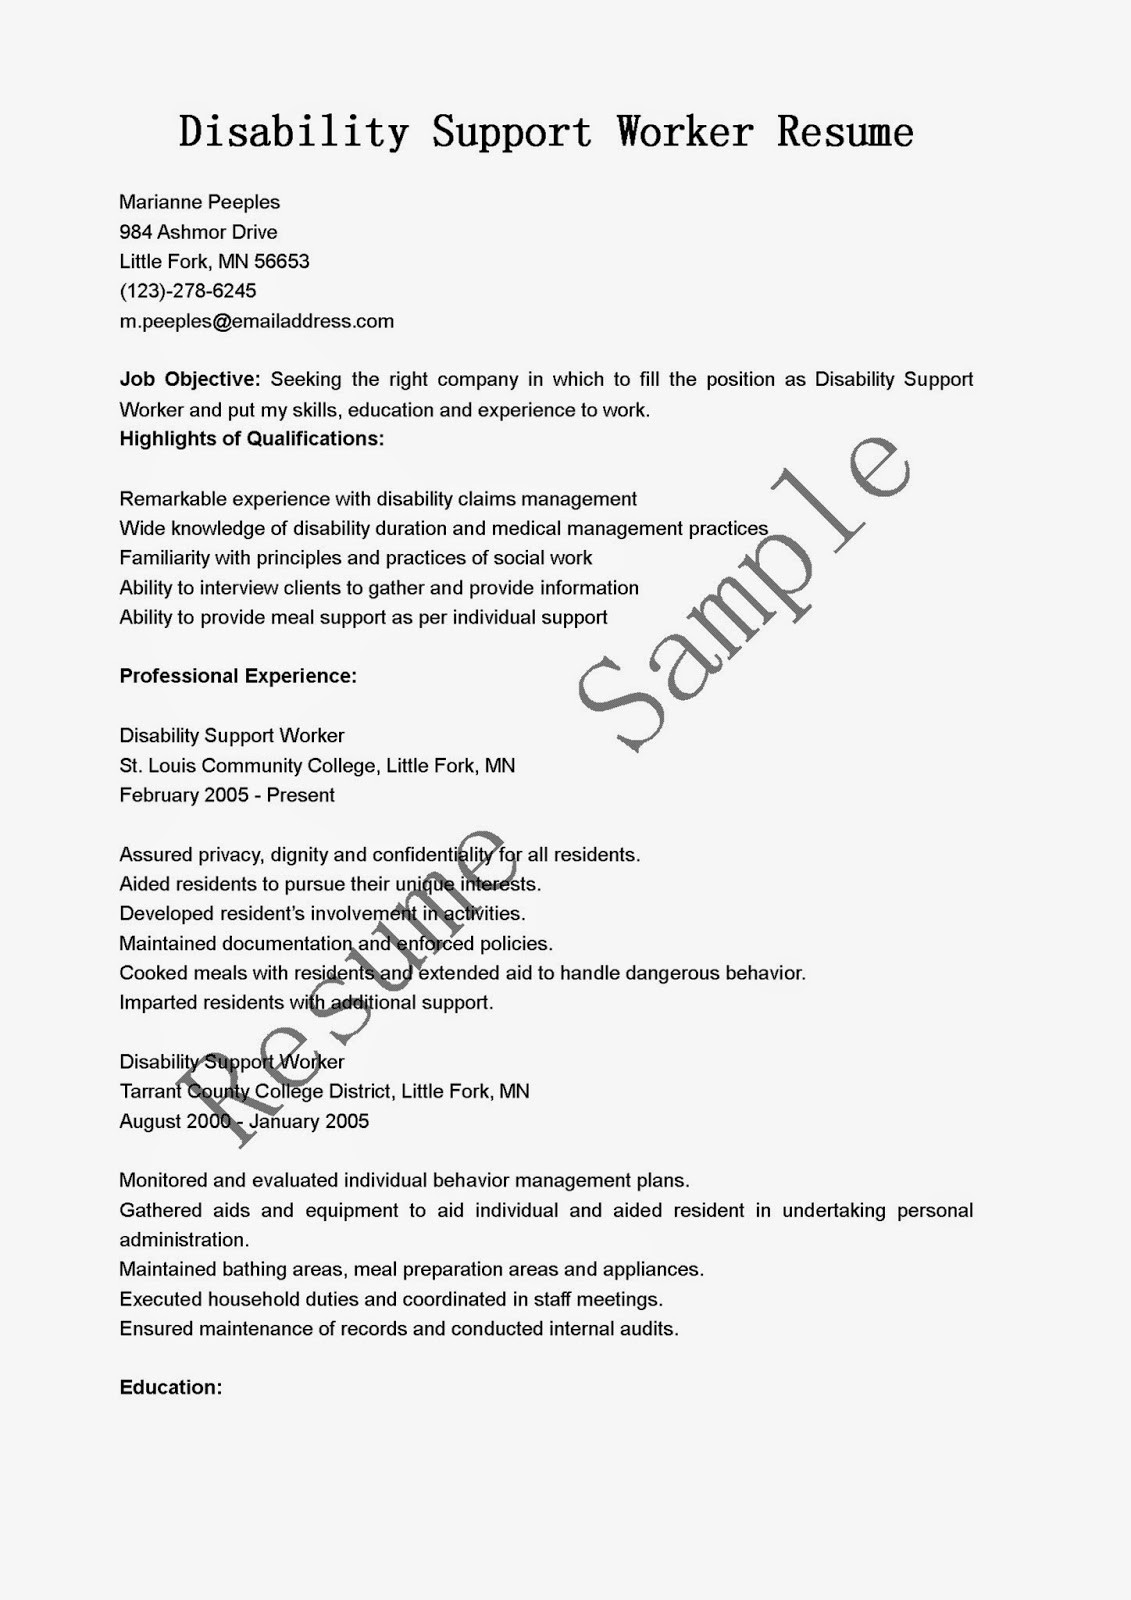 Free Sample Resume for Disability Support Worker Resume Samples Disability Support Worker Resume Sample